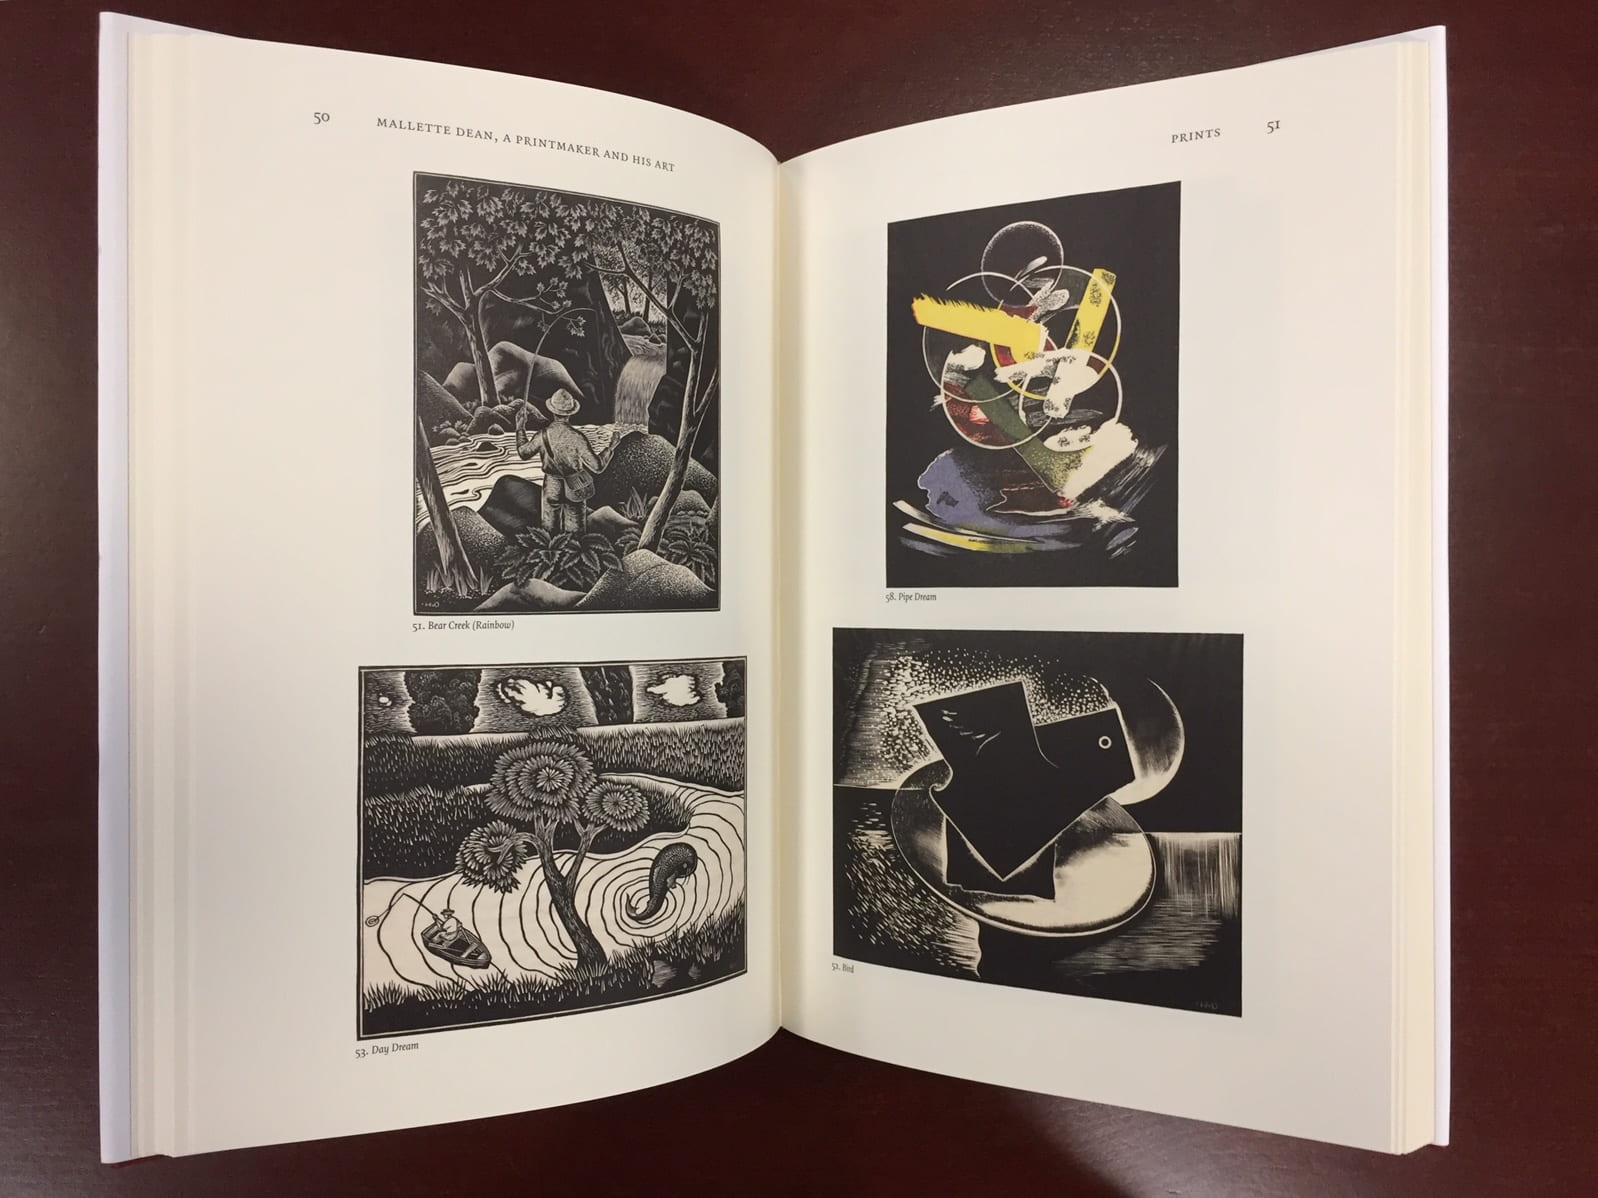 open pages of John Hawk's book featuring surreal prints by Mallette Dean